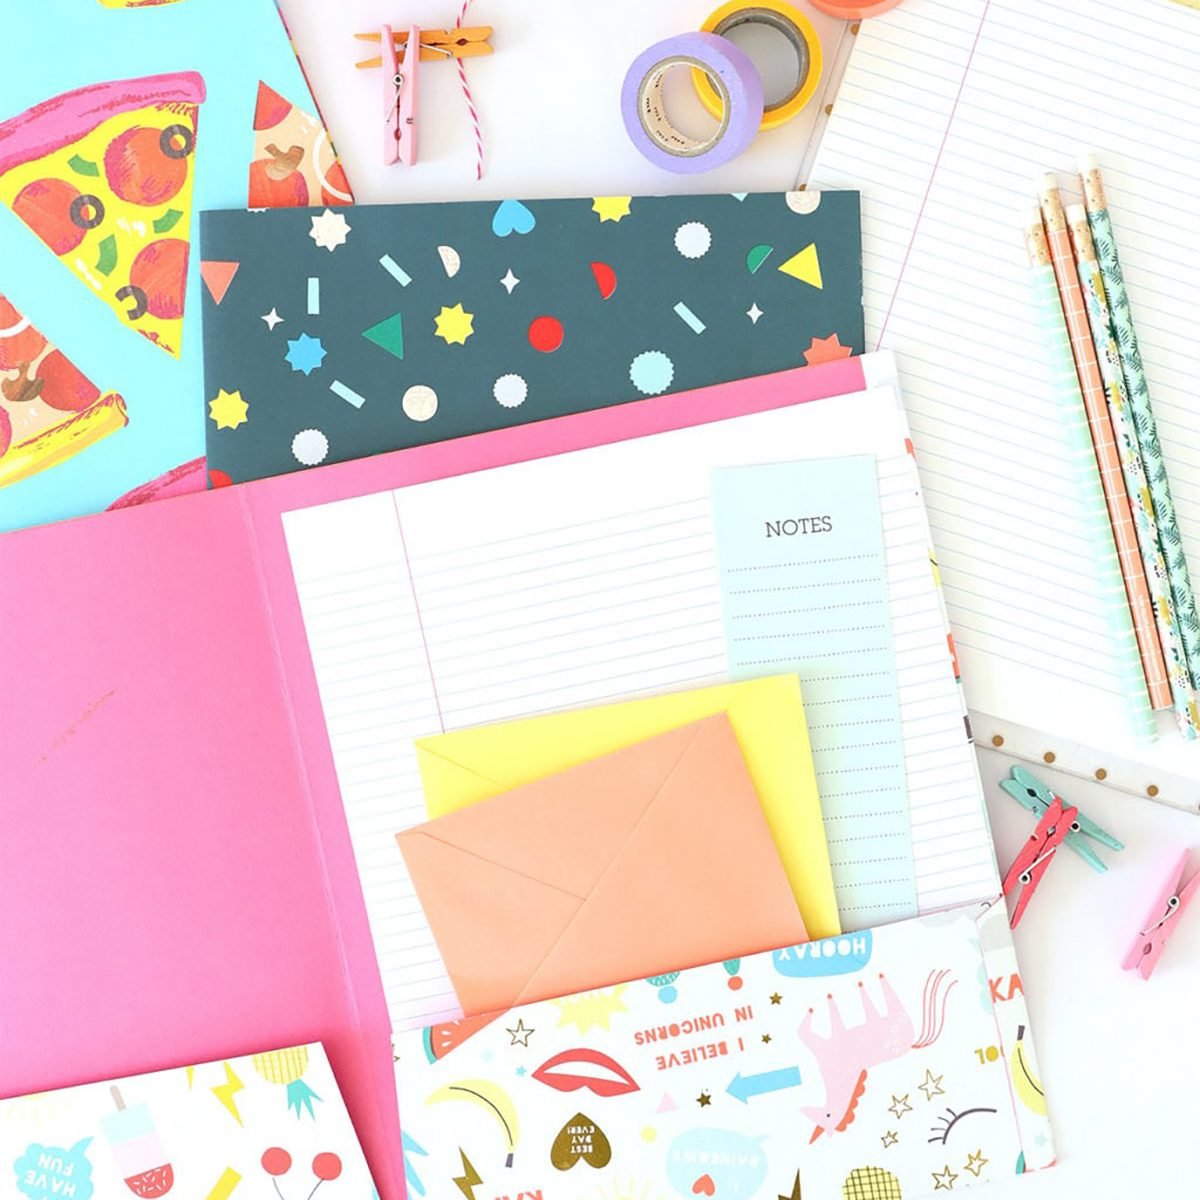 10 Back-to-School Ideas That'll Get Your Kids Excited